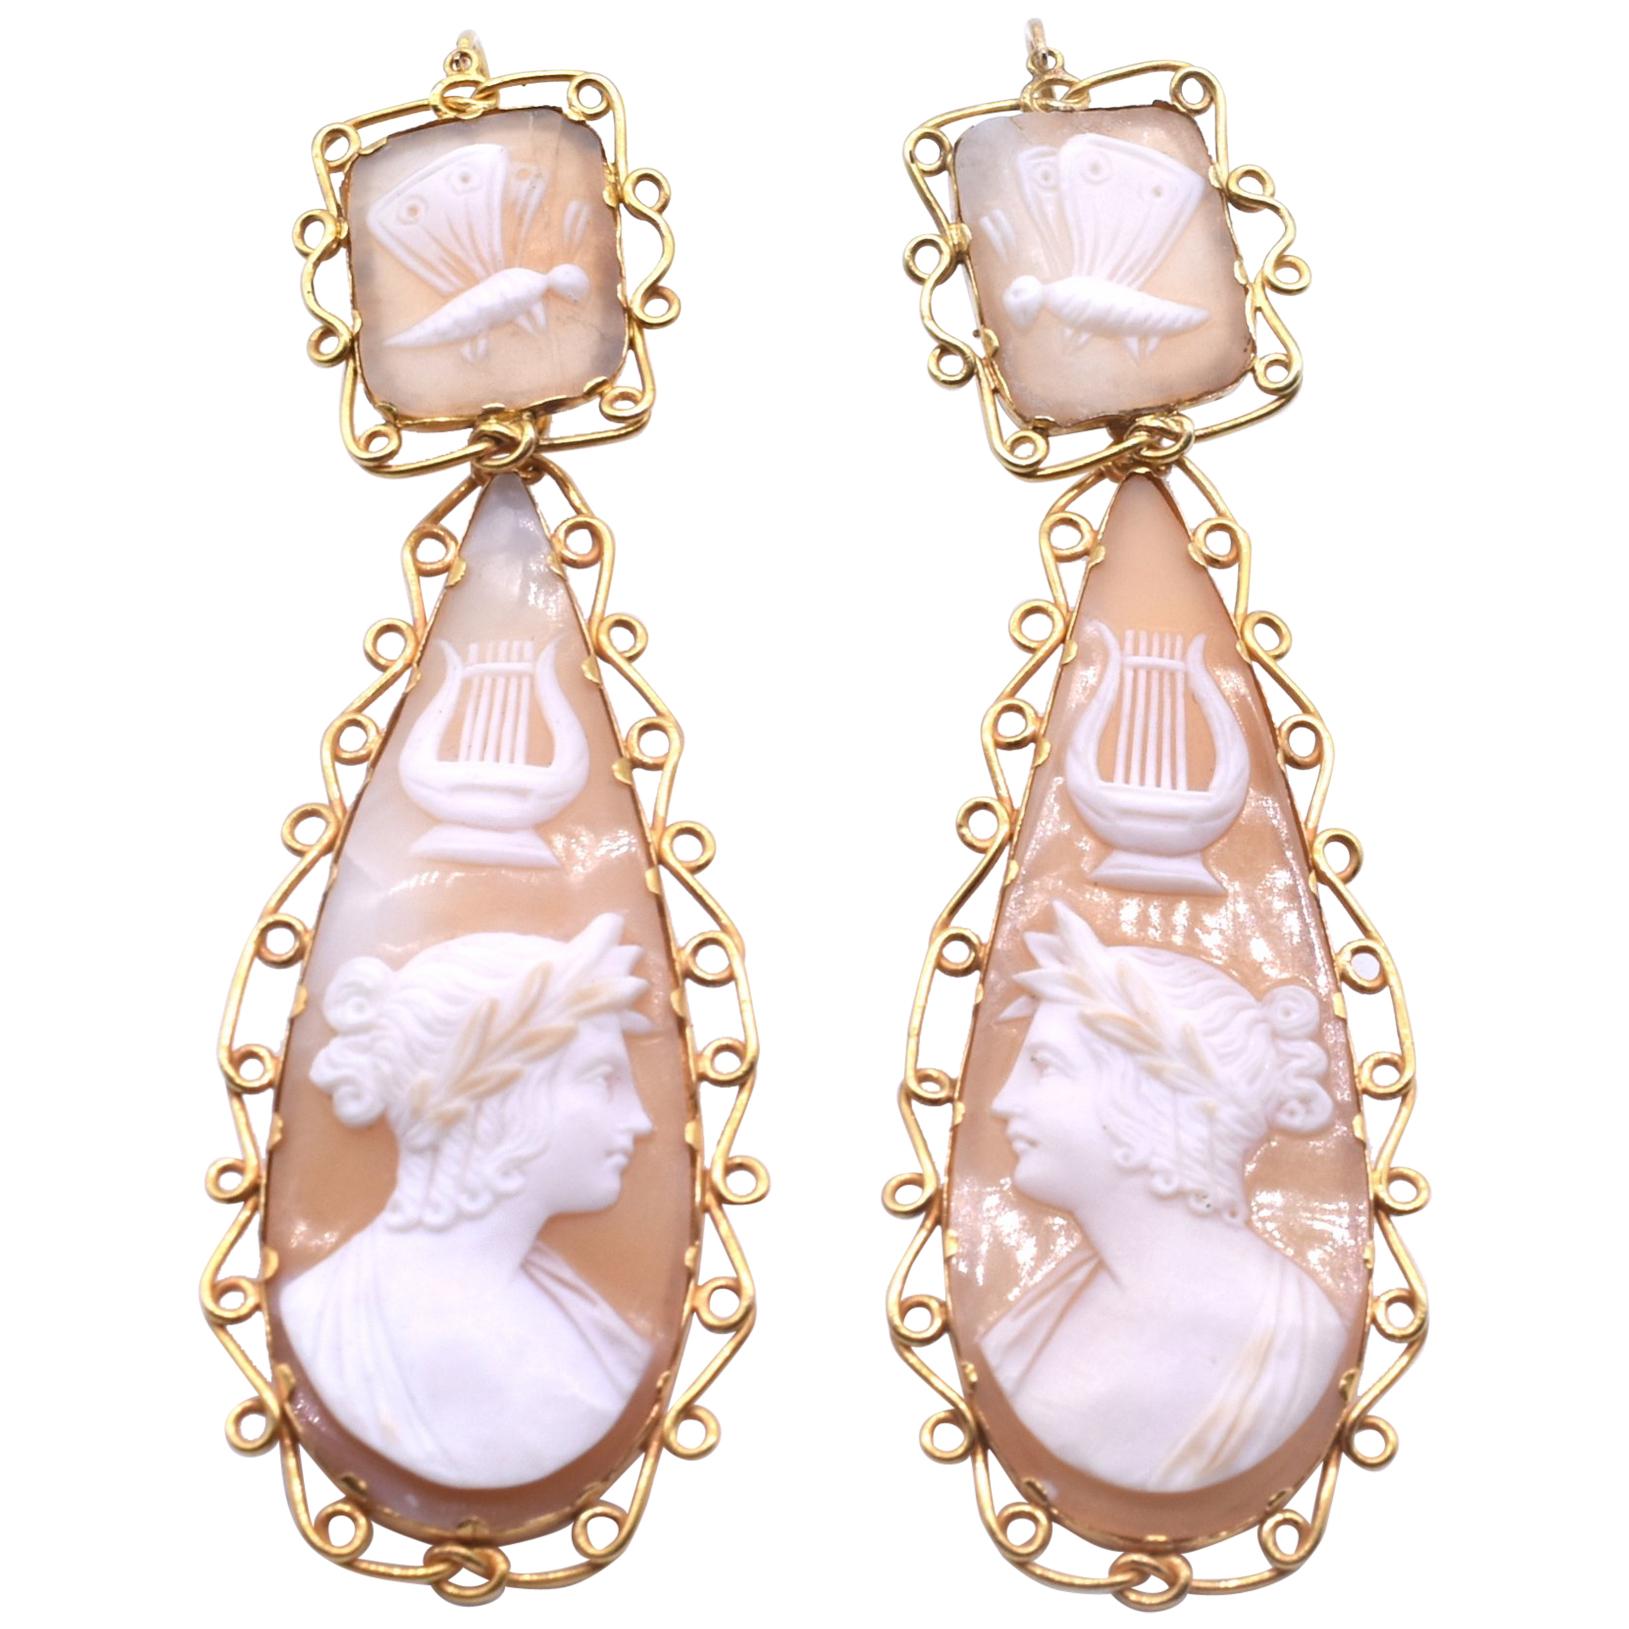 Antique Gold Cameo Shell Day Night Earrings of Apollo, c1850